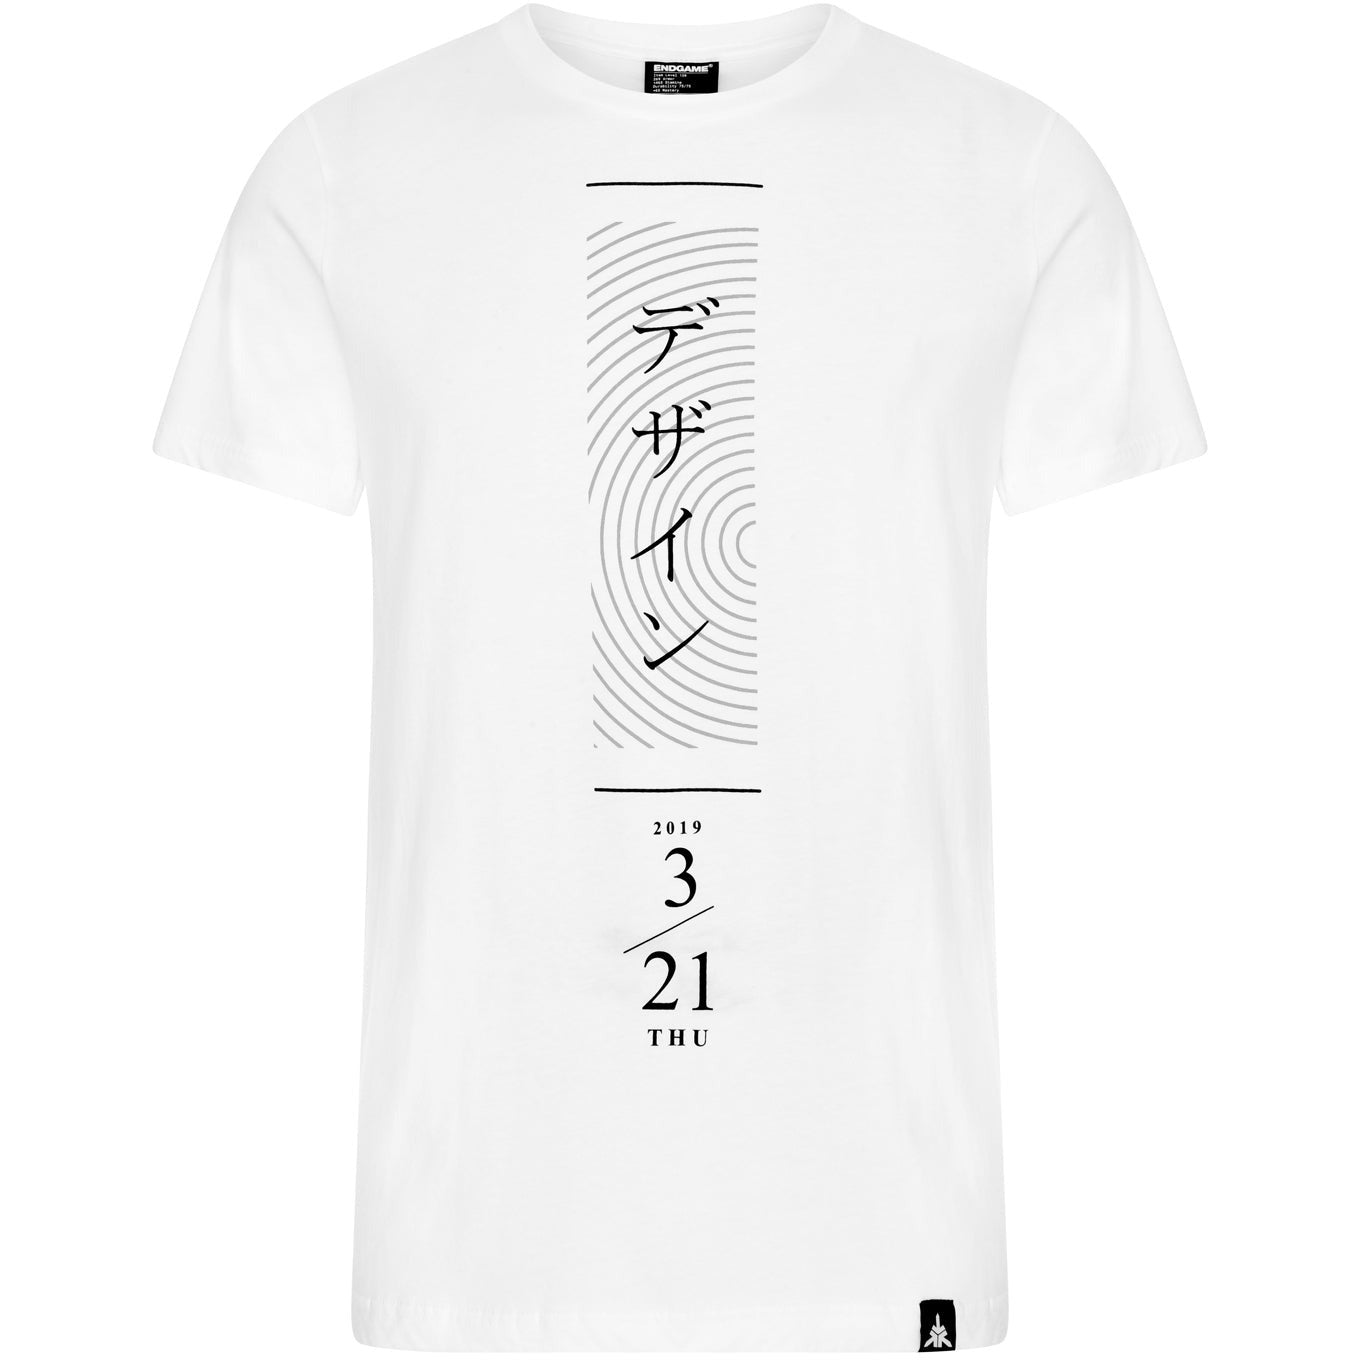 March of Time T-Shirt